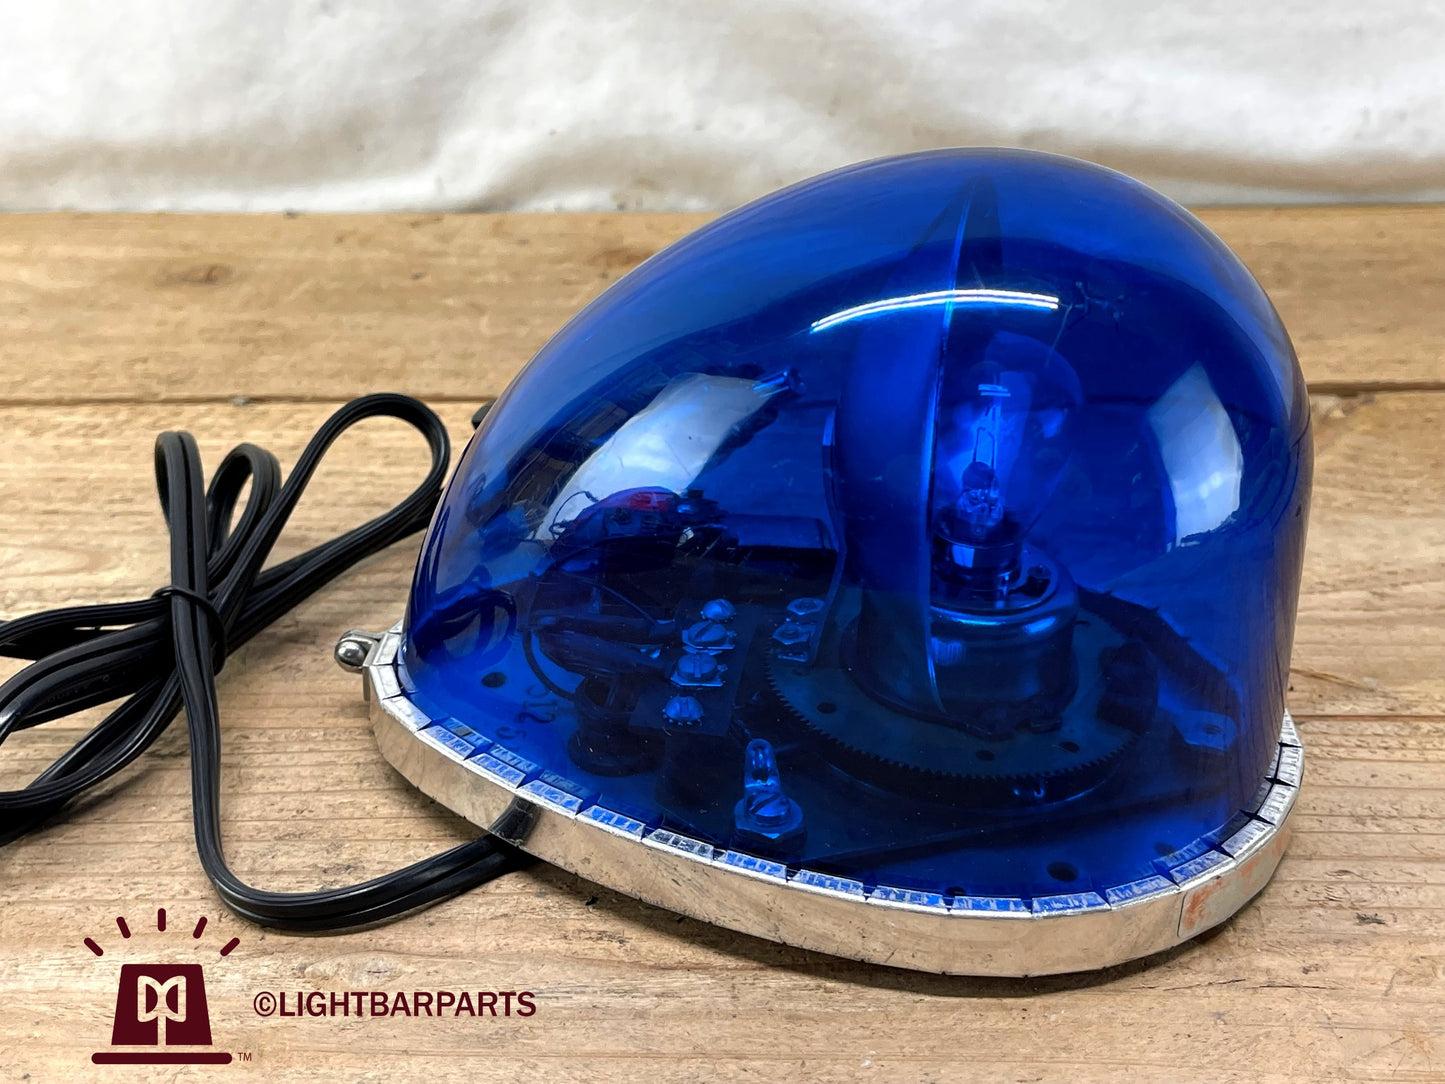 Federal Signal - Fire Ball - First Generation - Model FB-1 / 2A12  / 12v Includes Red and Blue Domes